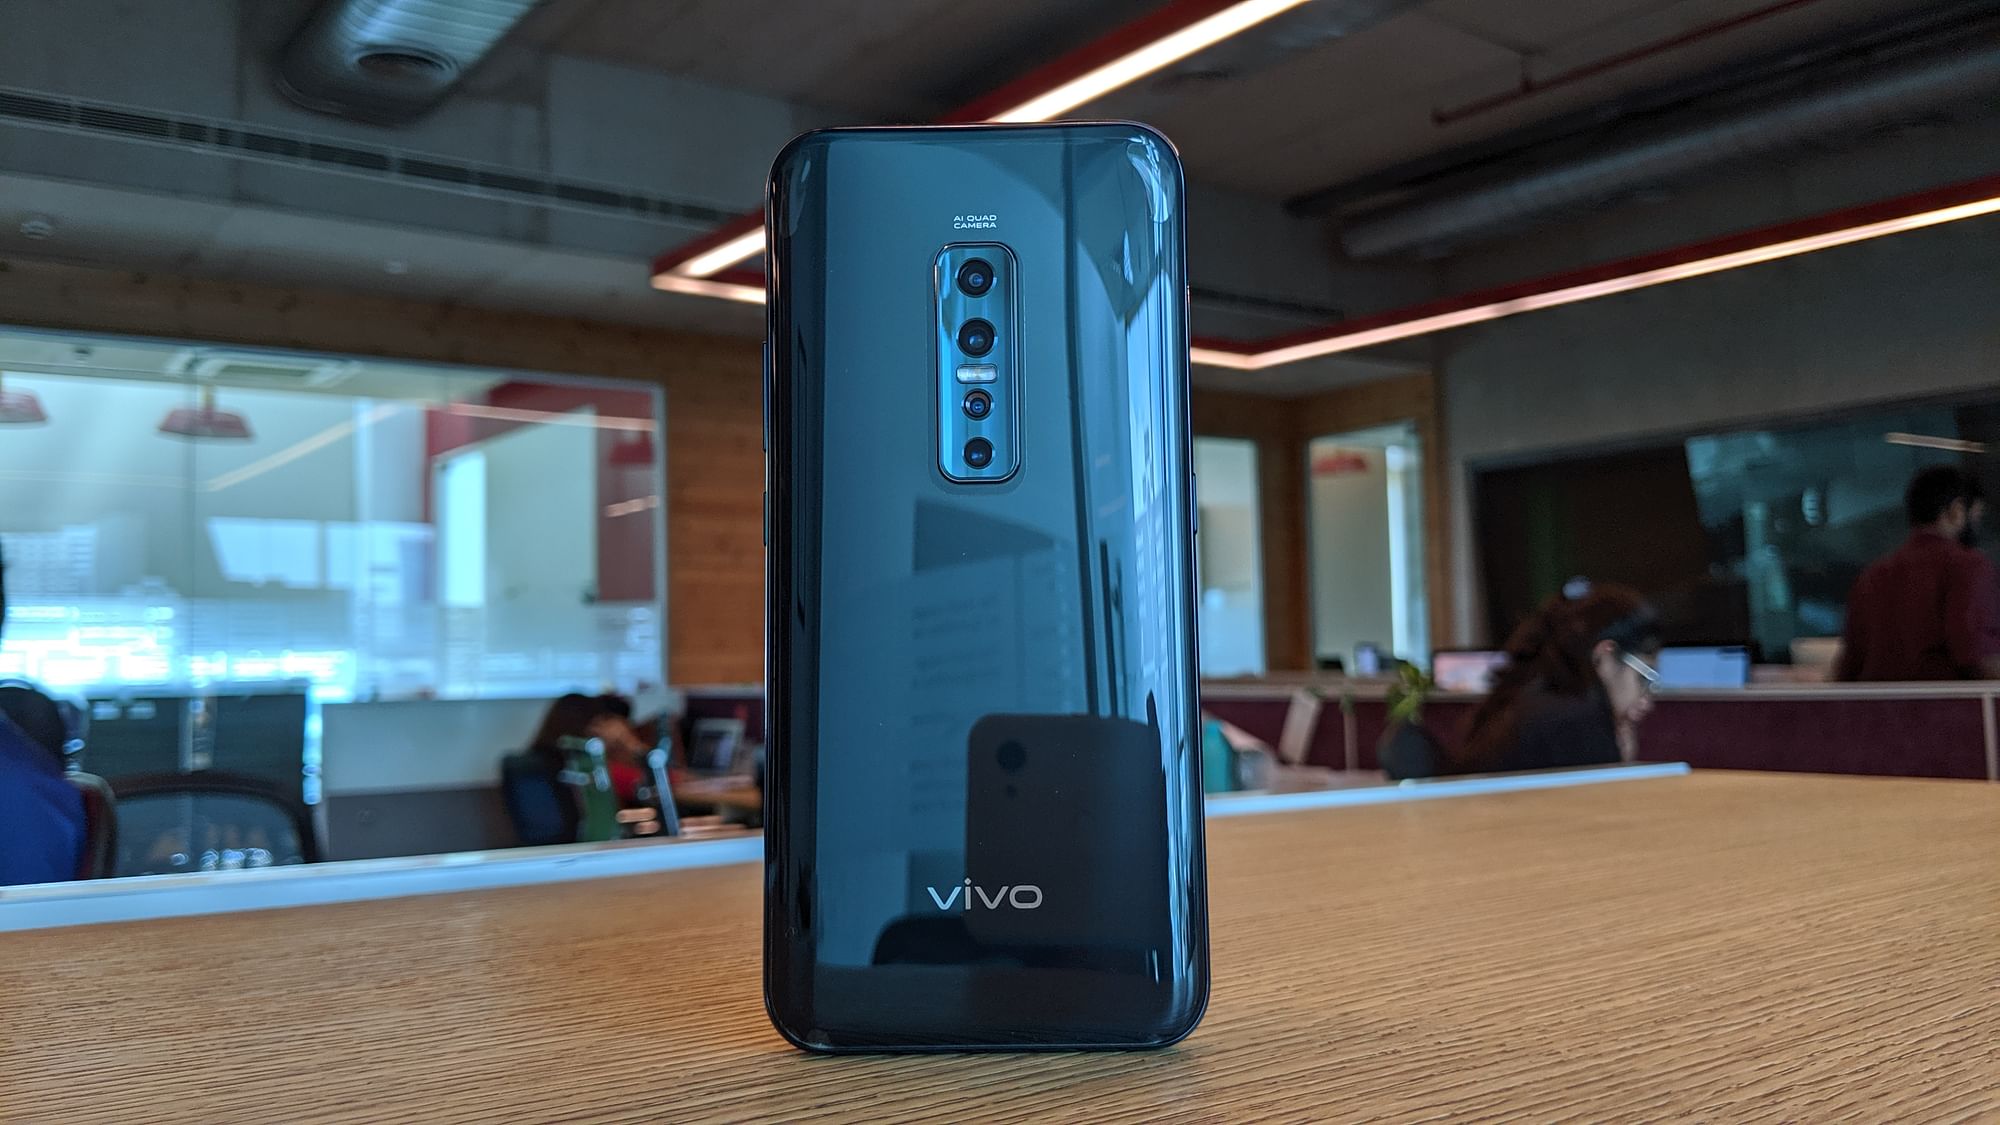 Vivo V17 Pro was the last phone to be launched in India by the Chinese company.